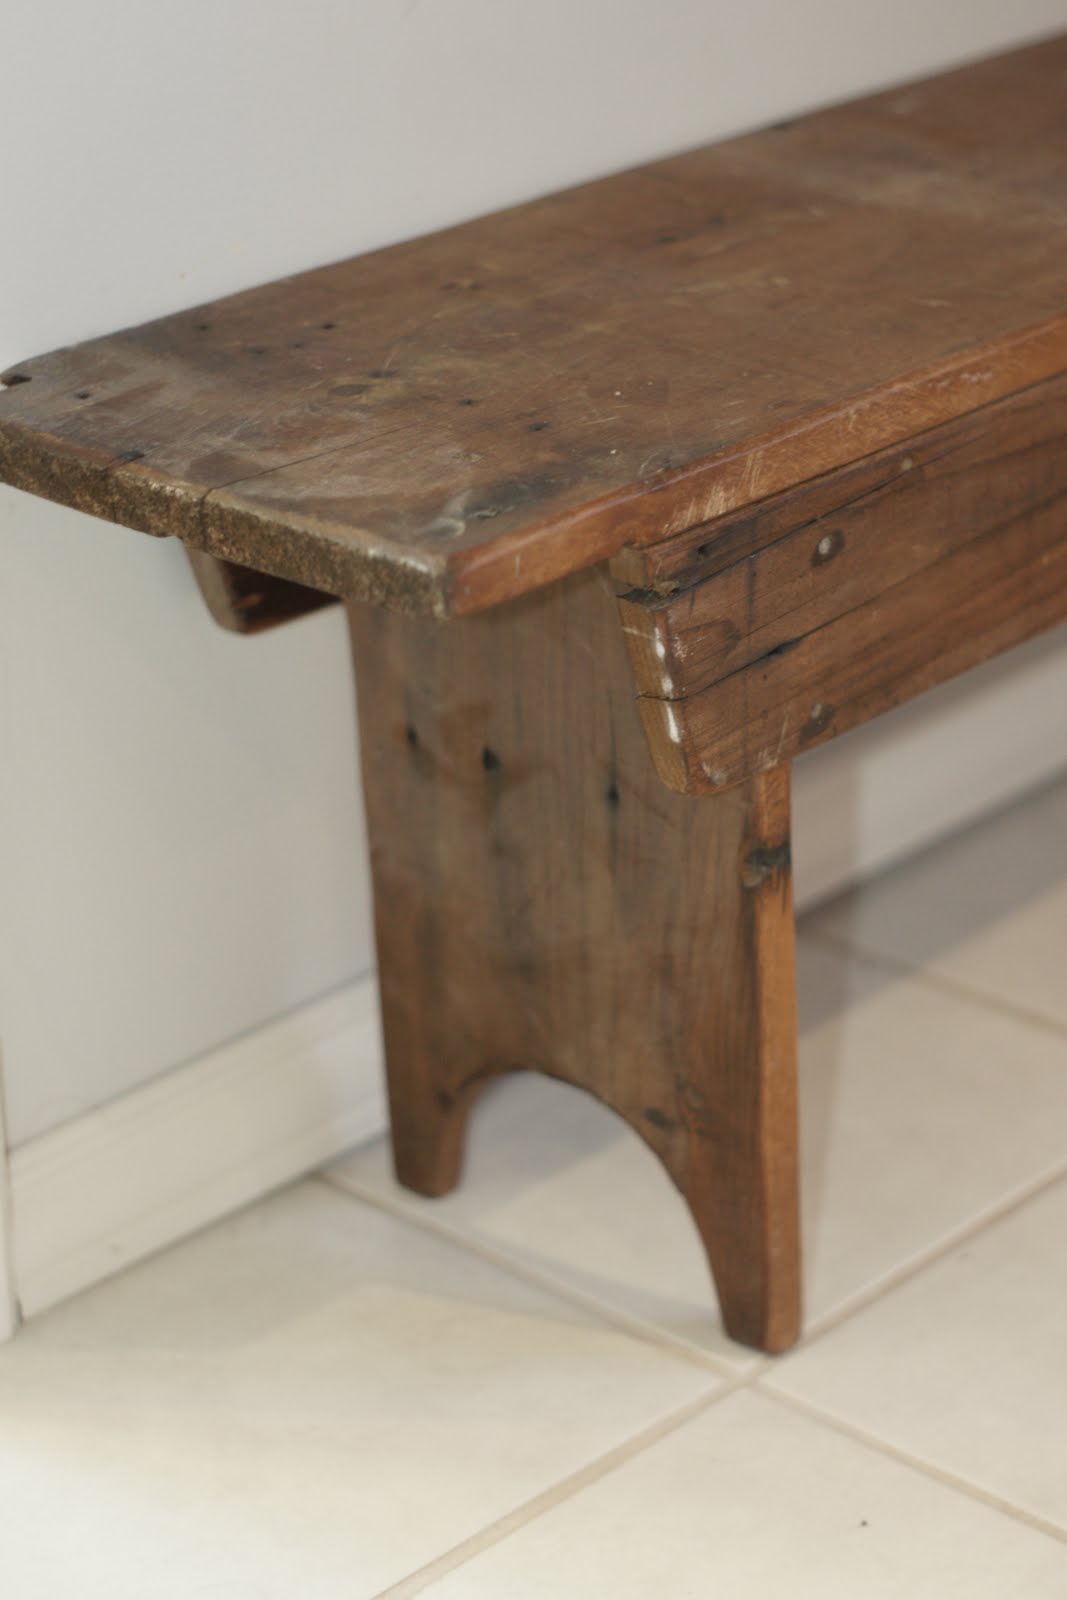 Life with 5 Monsters!: Century old barn board bench